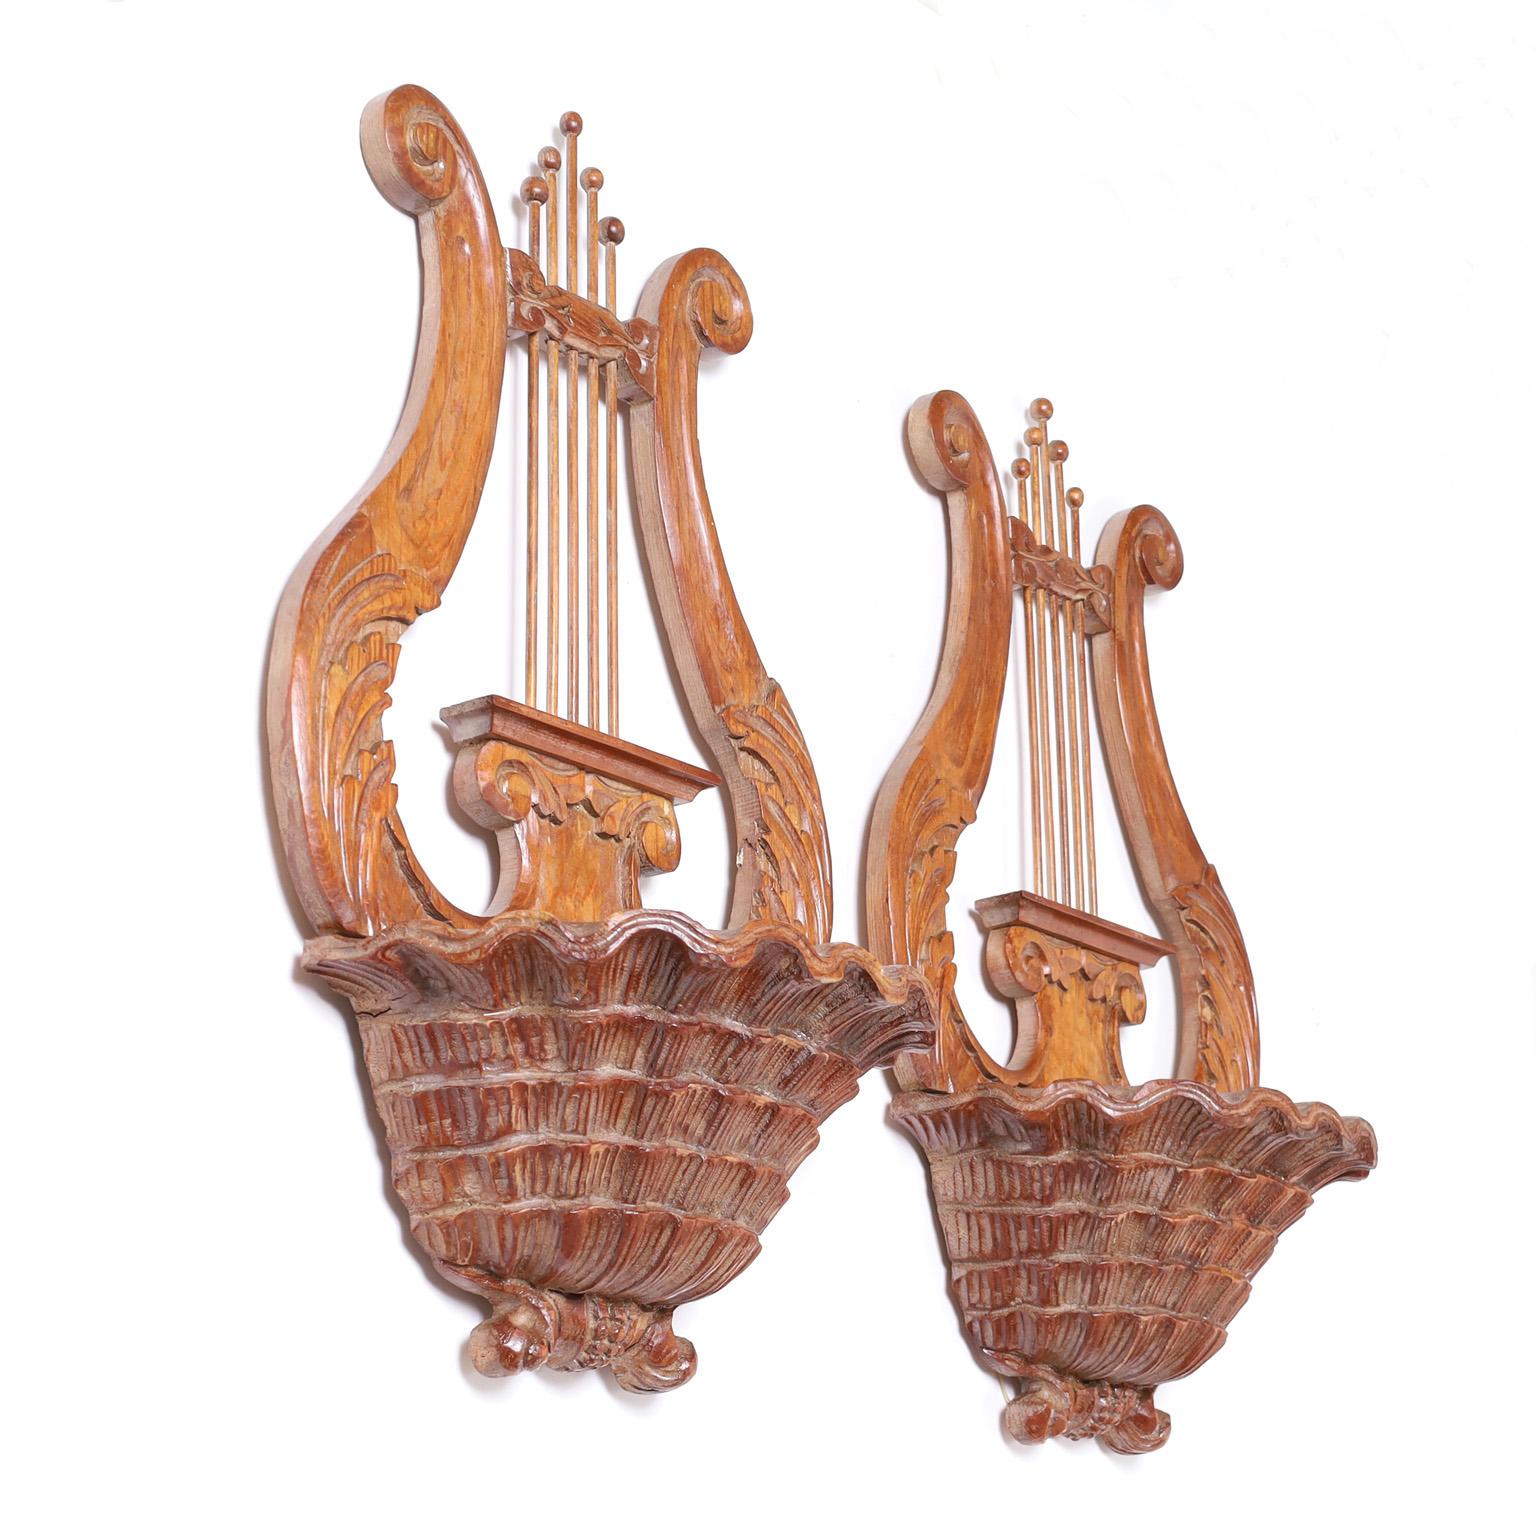 Neo classic pair of wall sconces crafted in mahogany carved in a lyre form with acanthus leaves over a cornucopia basket with a zinc lined pocket.